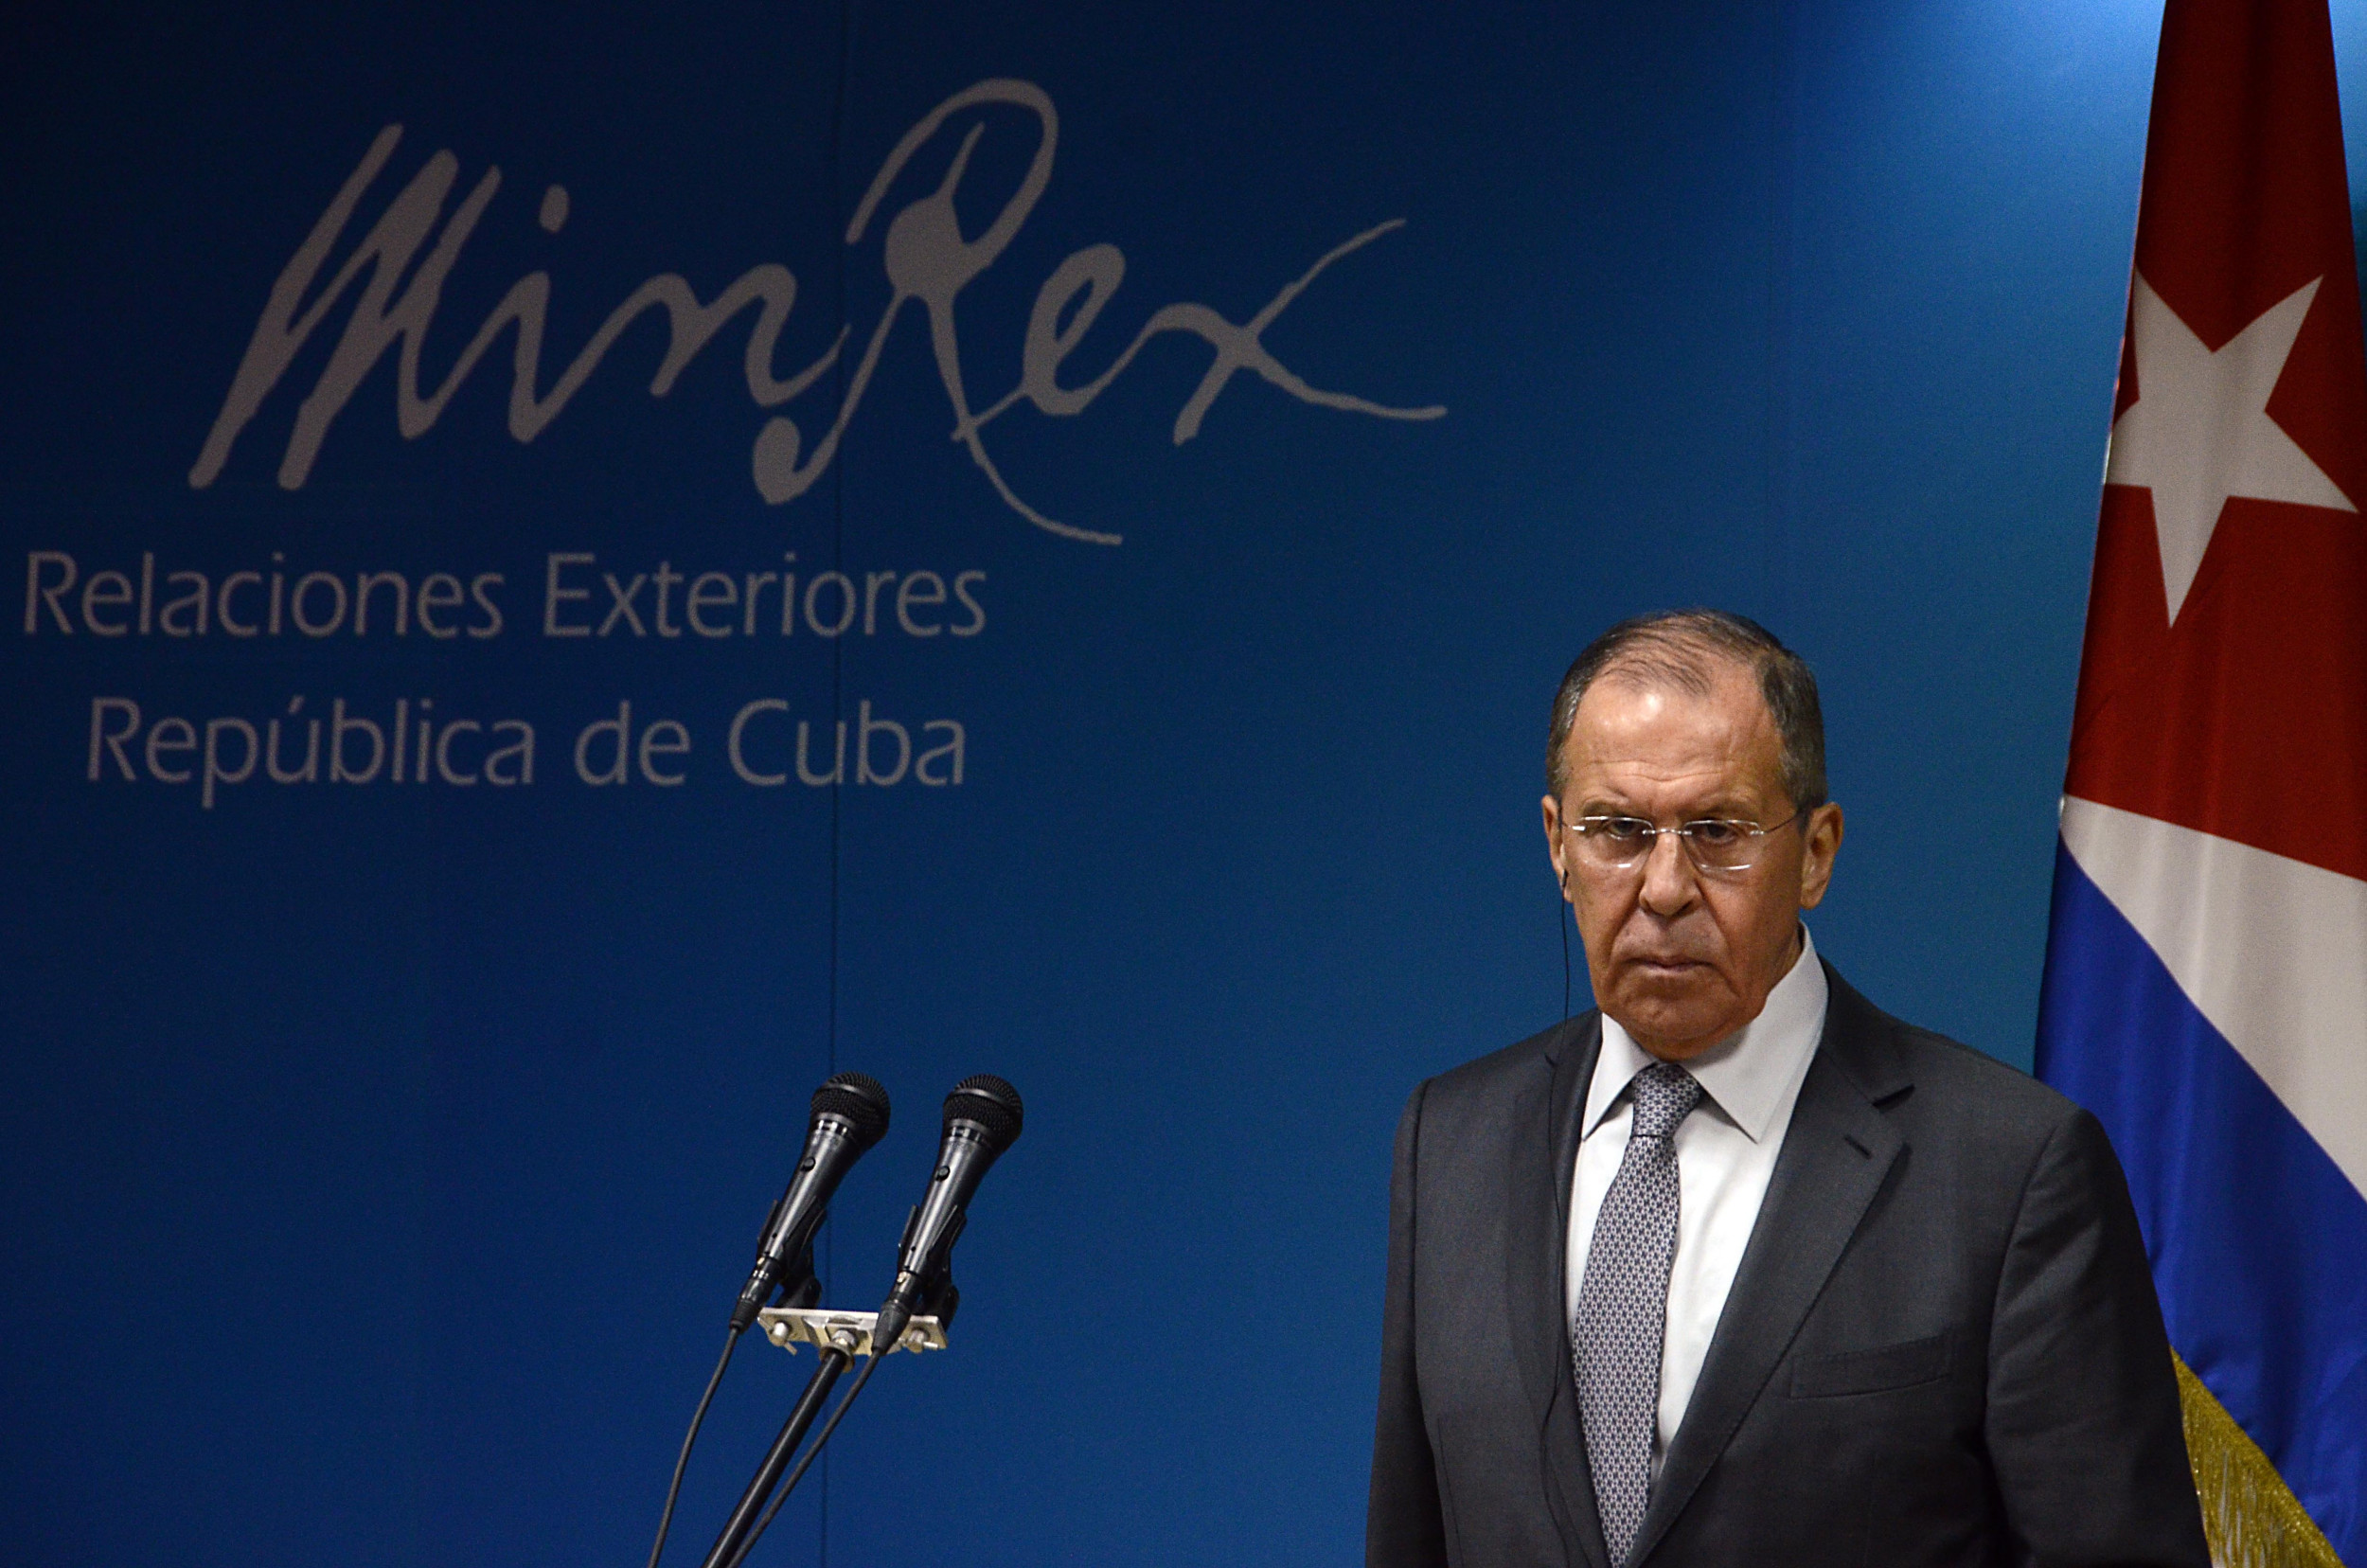 Russia Promises More Support for Cuba, Including 'Military Technical